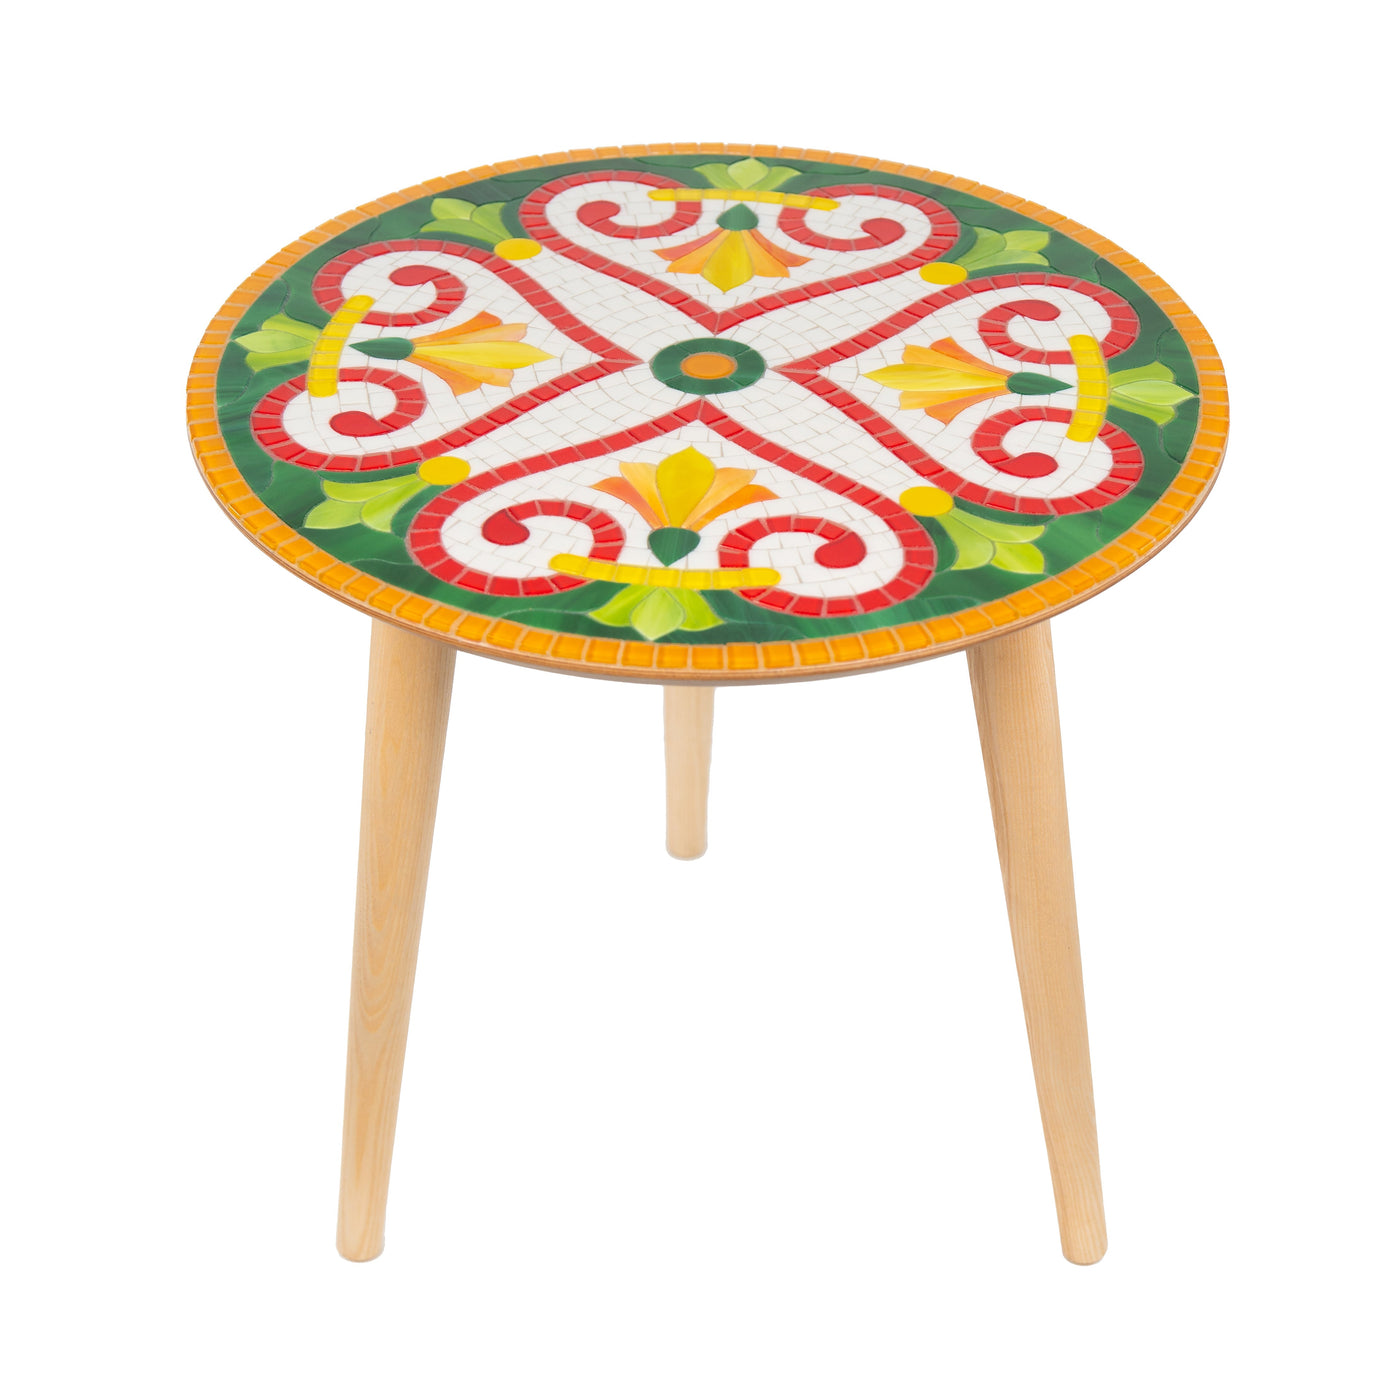 Versace pattern on stained glass mosaic coffee table